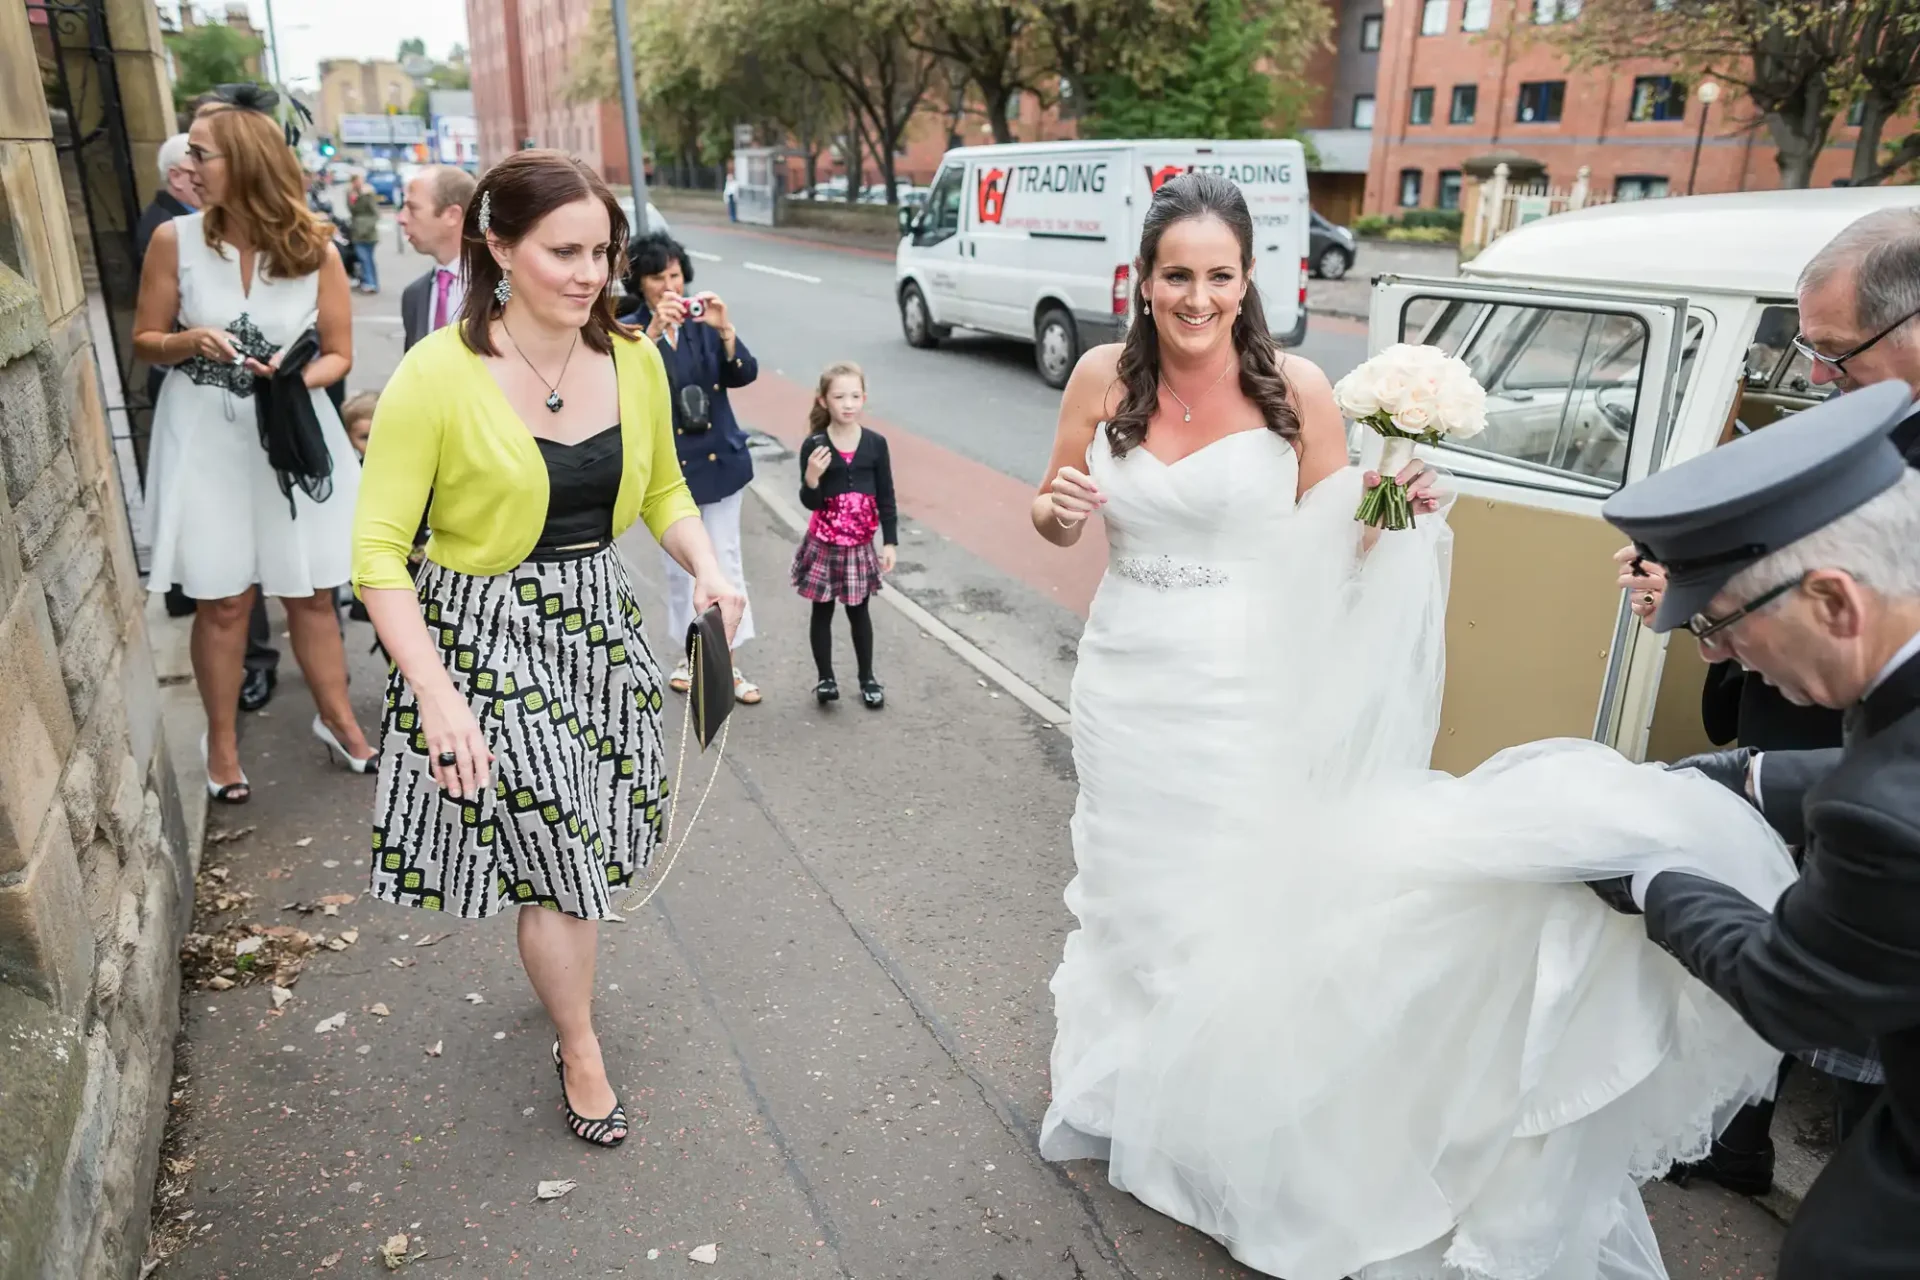 A bride in a white gown exits a vintage car on a city street, assisted by an older man, as a woman in a patterned dress and yellow cardigan approaches smiling.